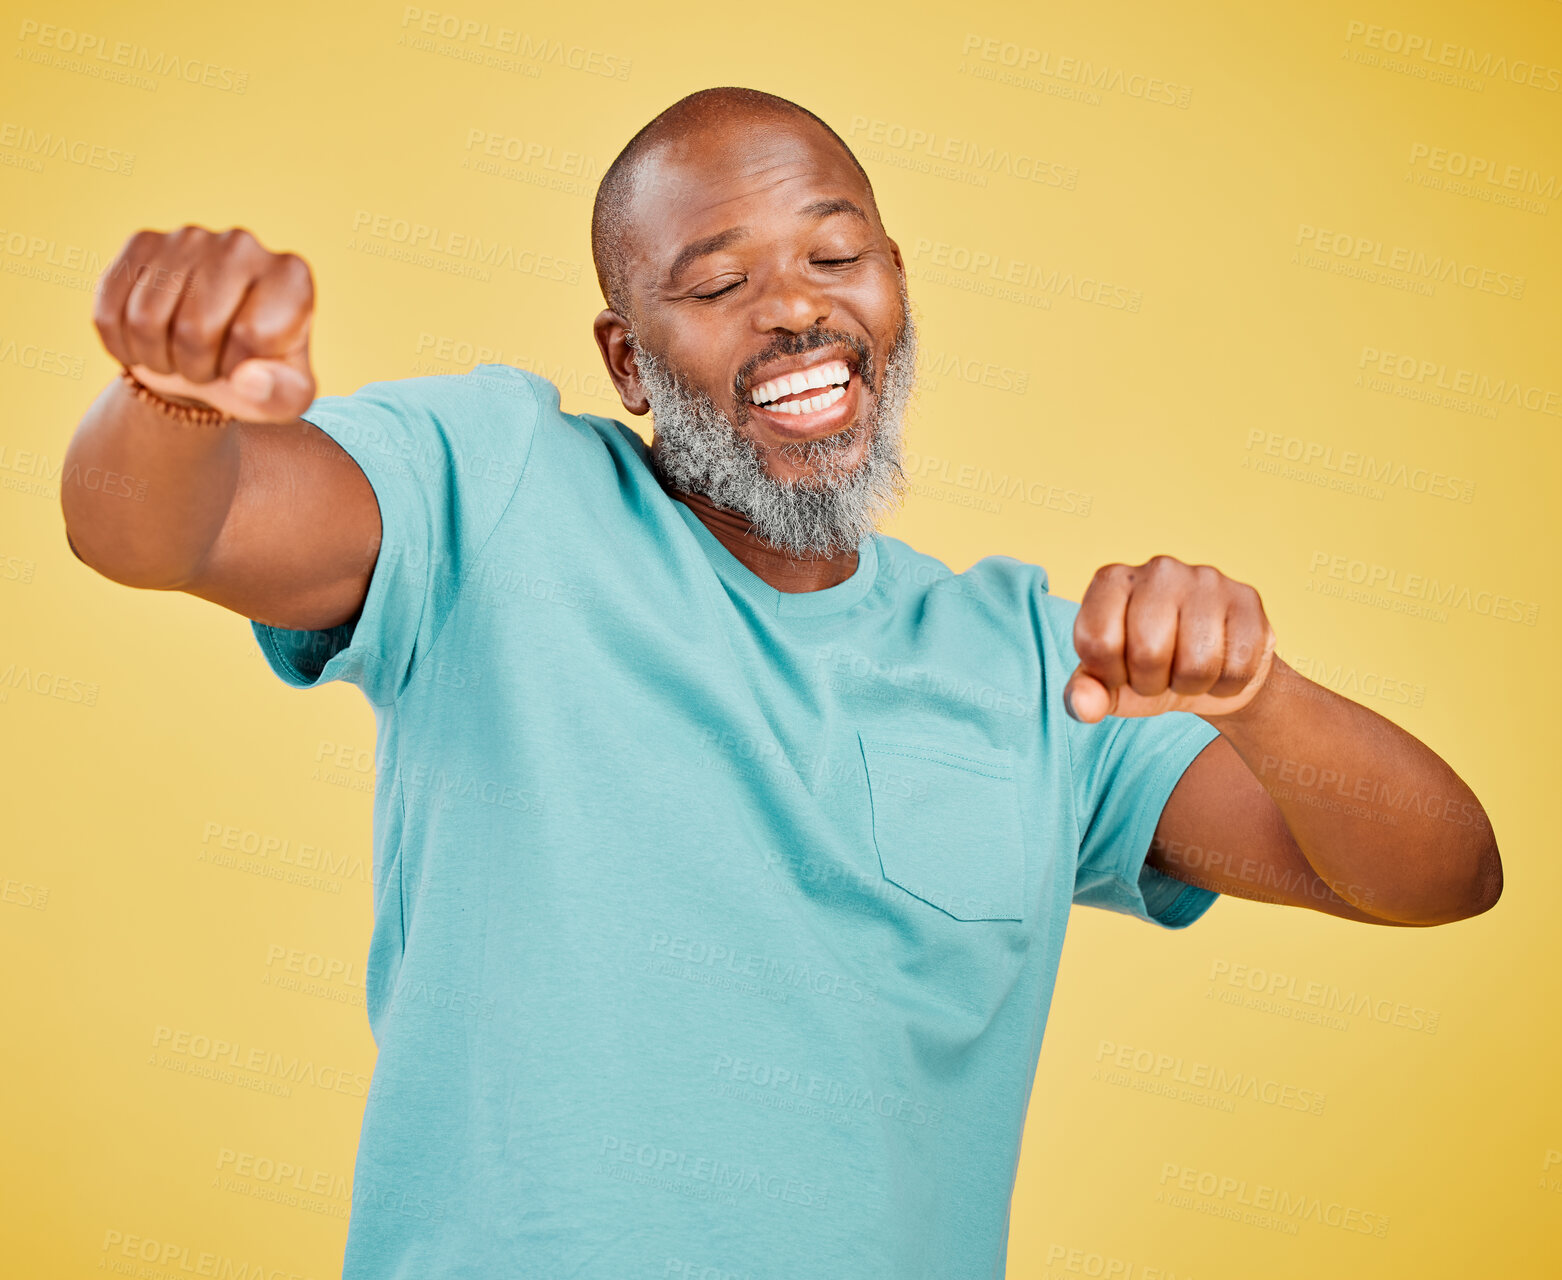 Buy stock photo A mature african man looking ecstatic while while celebrating and dancing by making a fist pump gesture with his hands and singing against a yellow studio background. Dance like nobody's watching